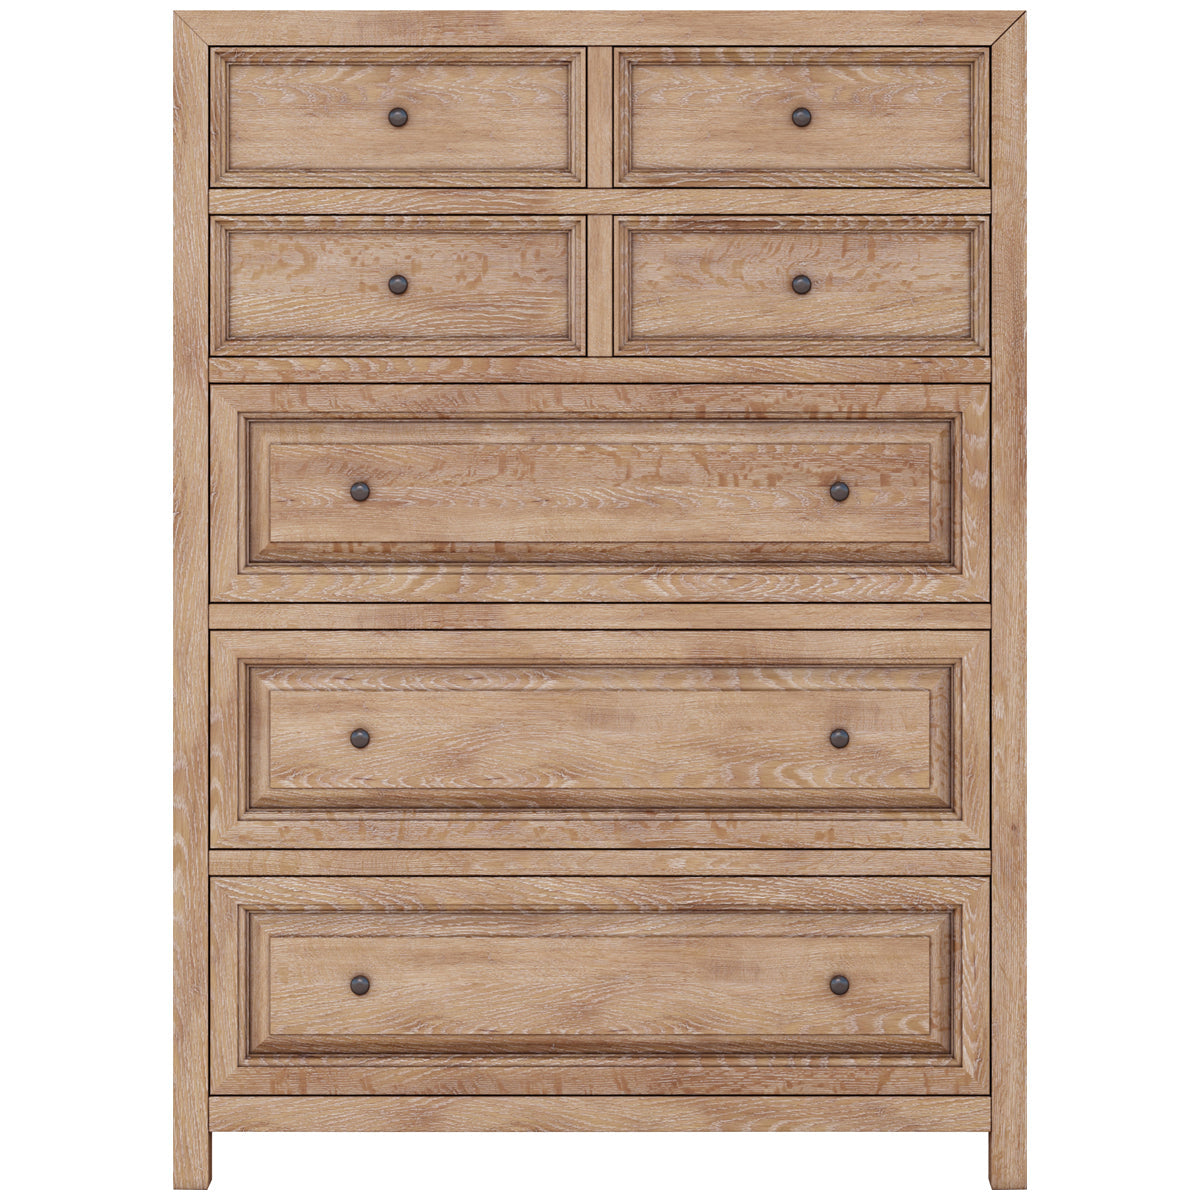 A.R.T. Furniture Post 7-Drawer Chest